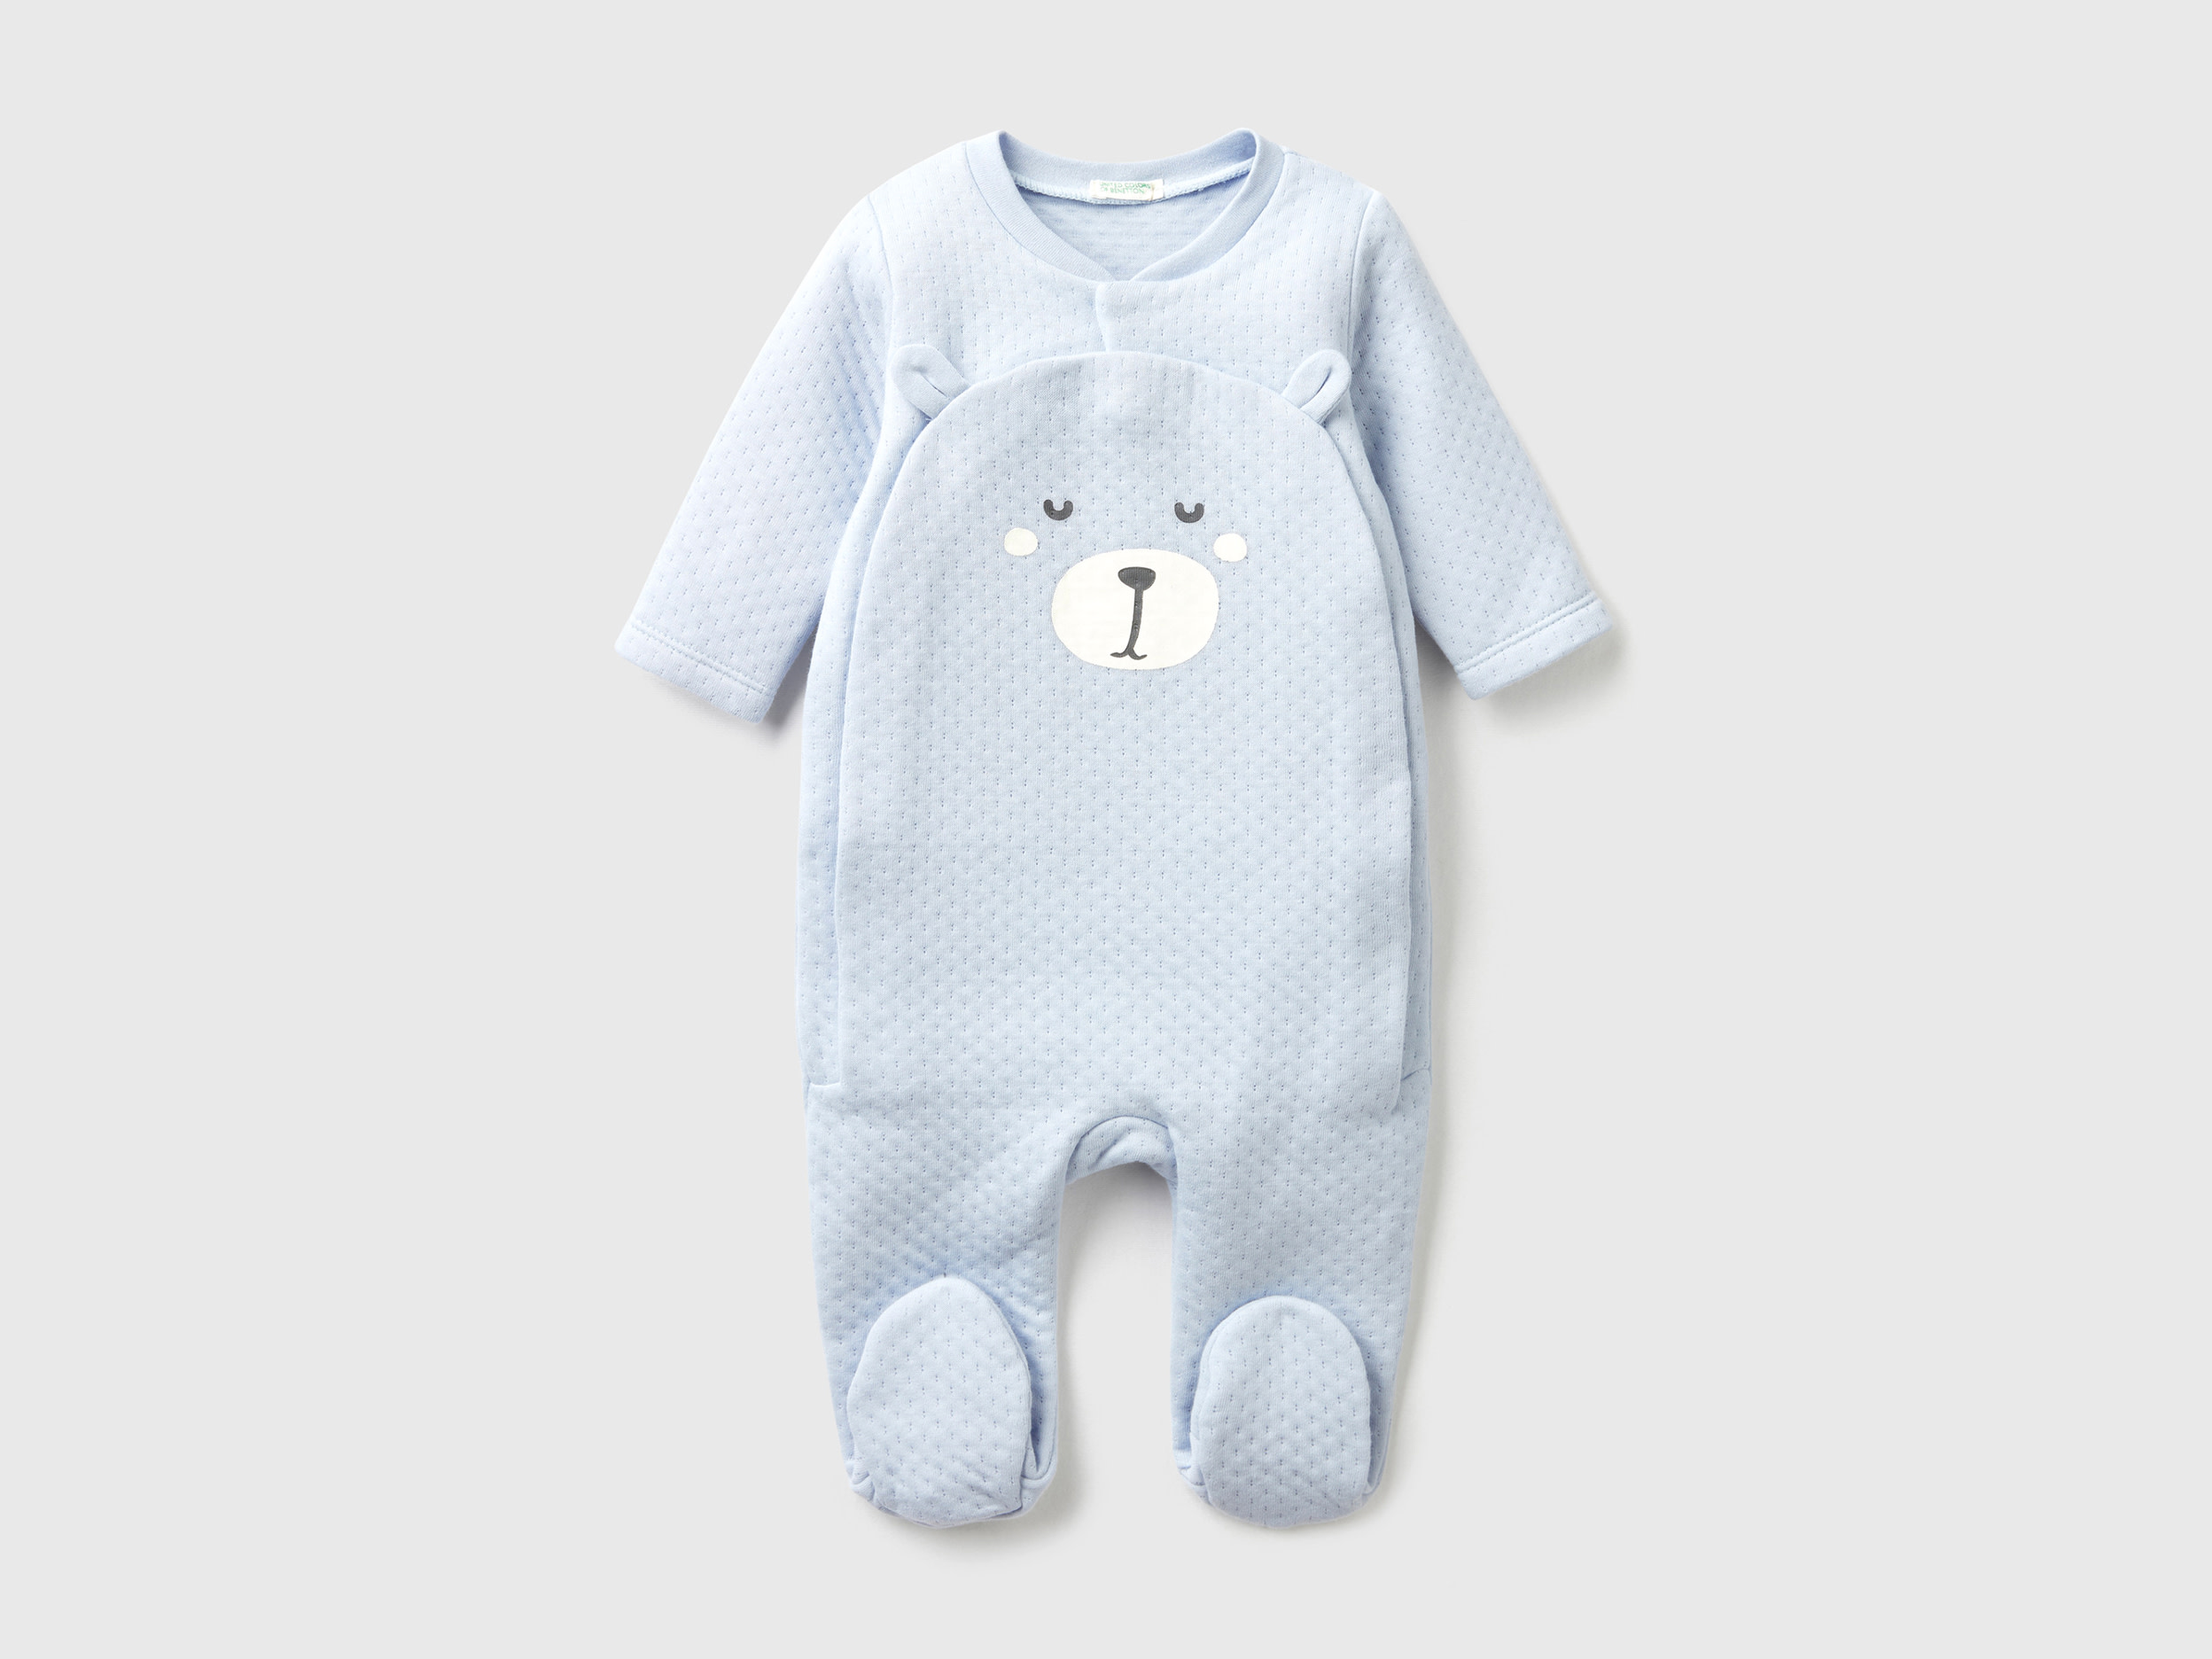 Benetton, Teddy Bear Onesie With Quilted Look, size 3-6, Sky Blue, Kids